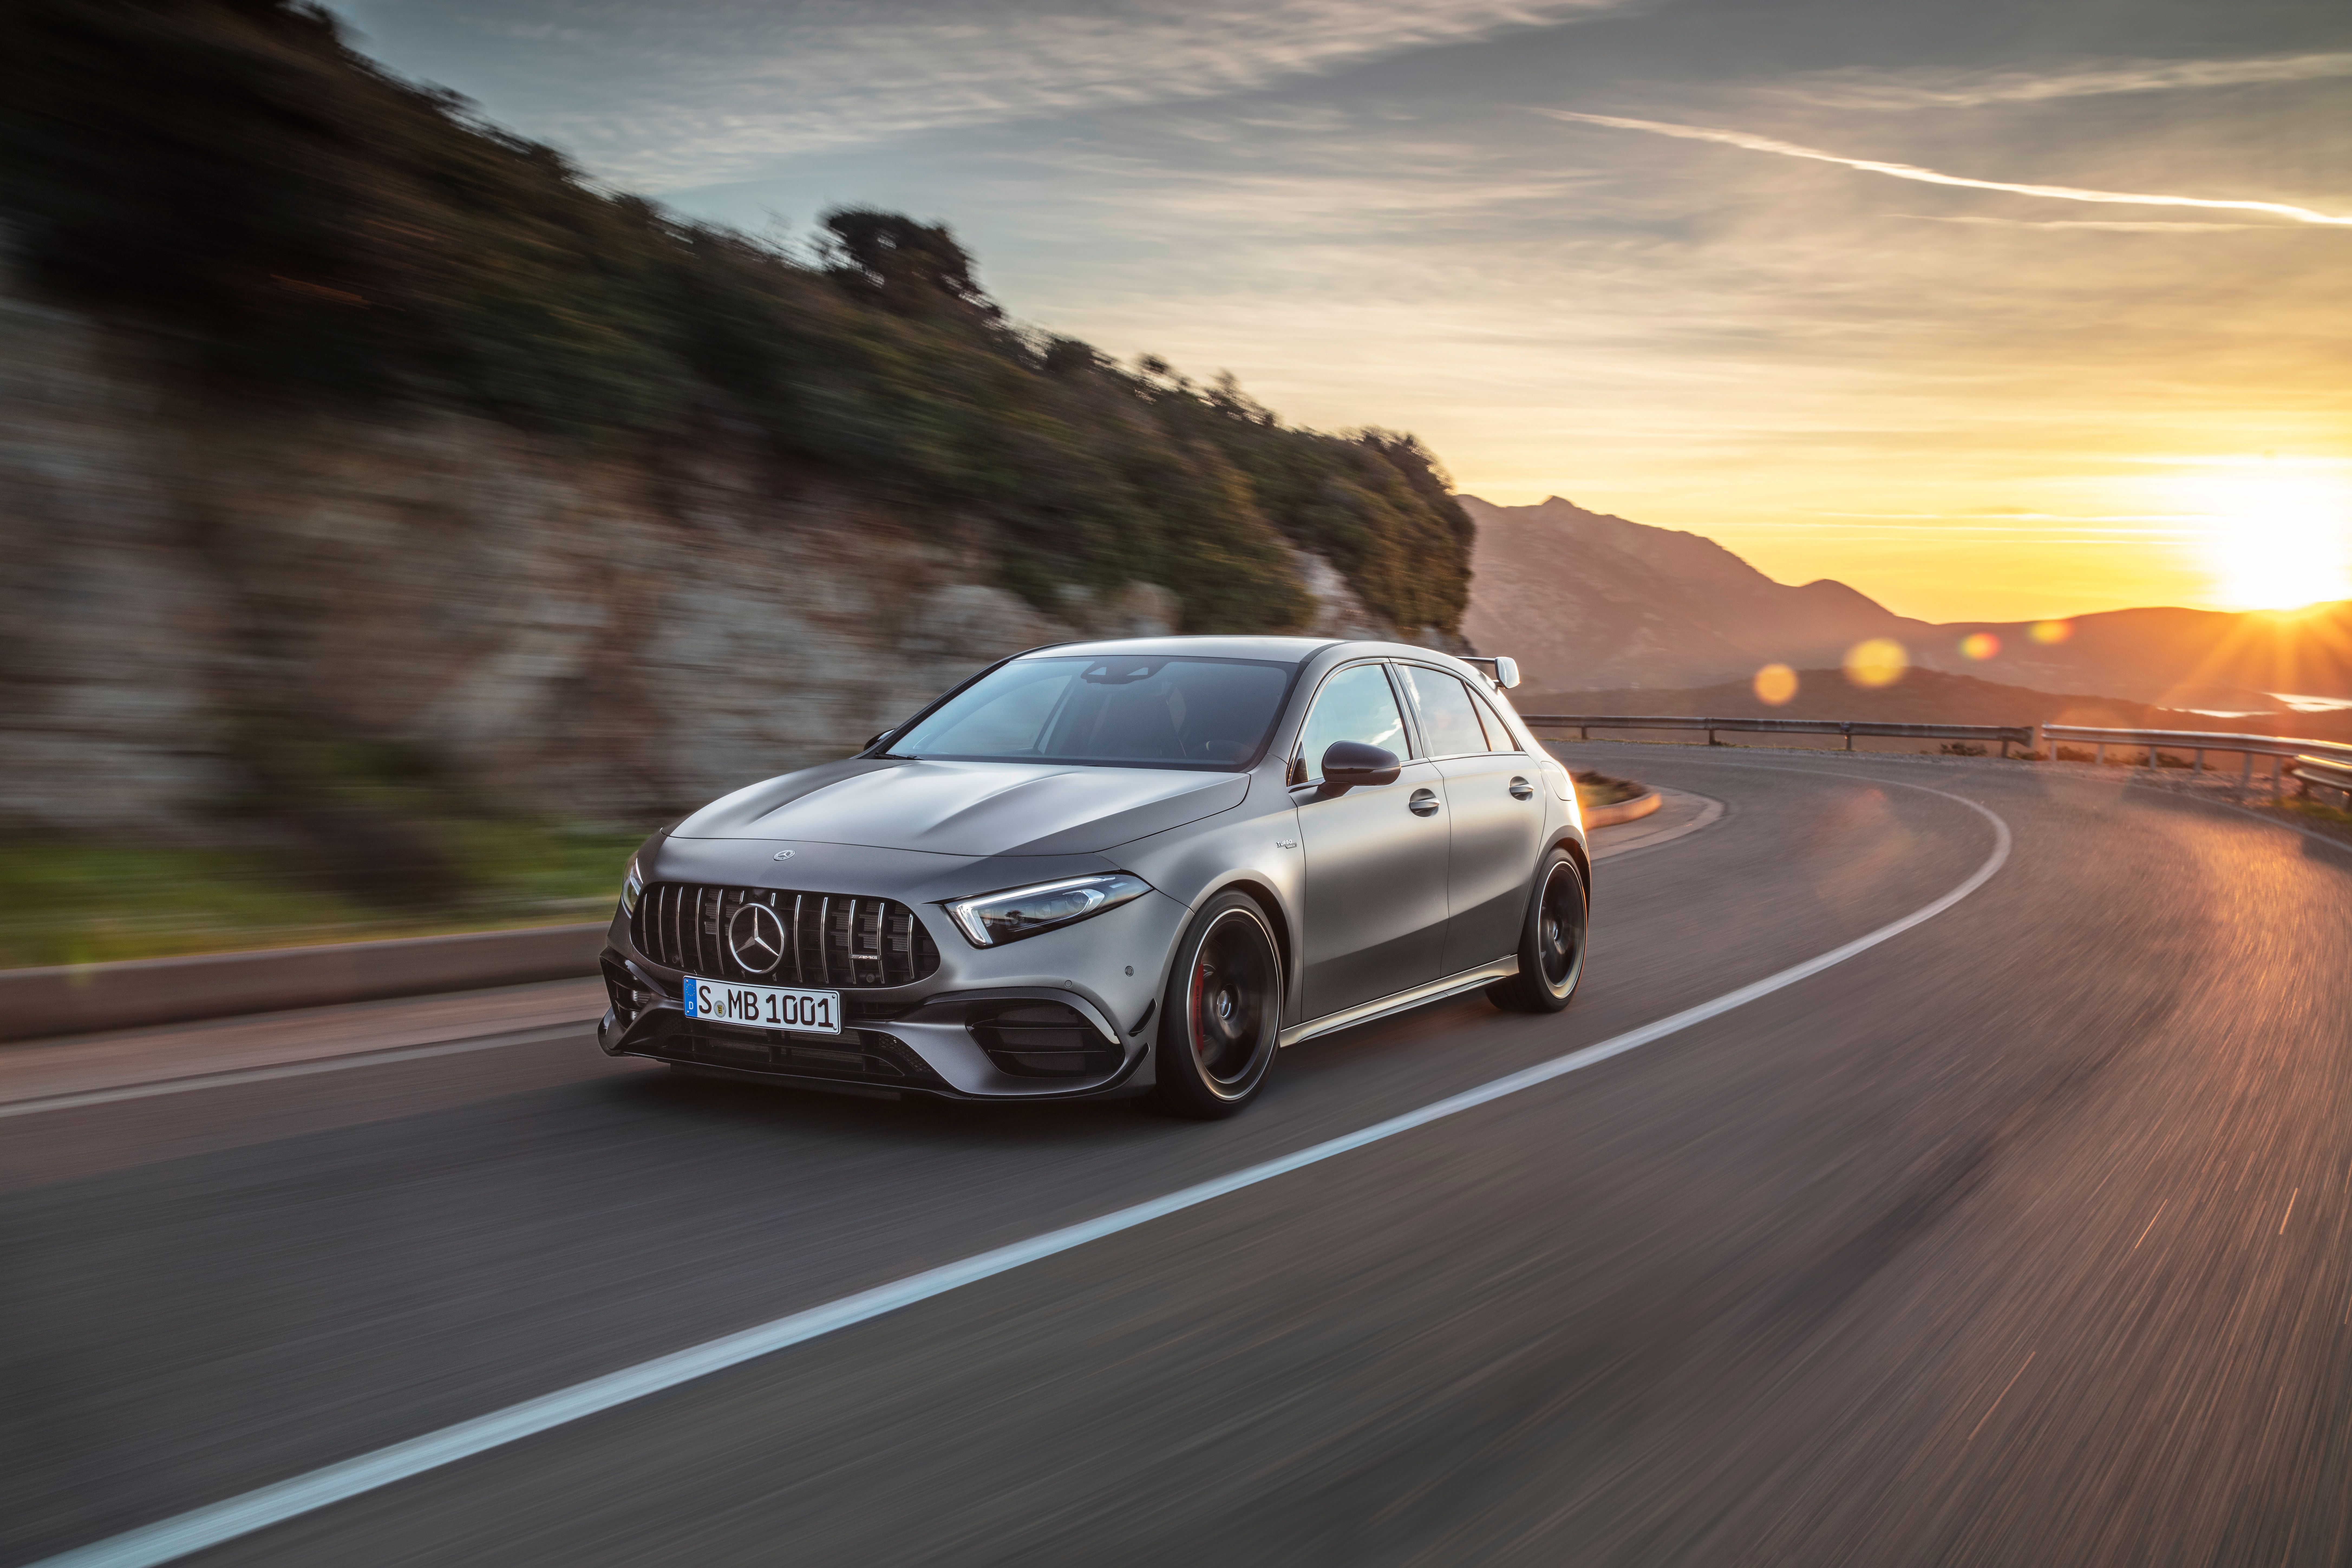 1962 The 2020 Mercedes-AMG A45 S is a lot quicker than the old AMG A45, but is it better?